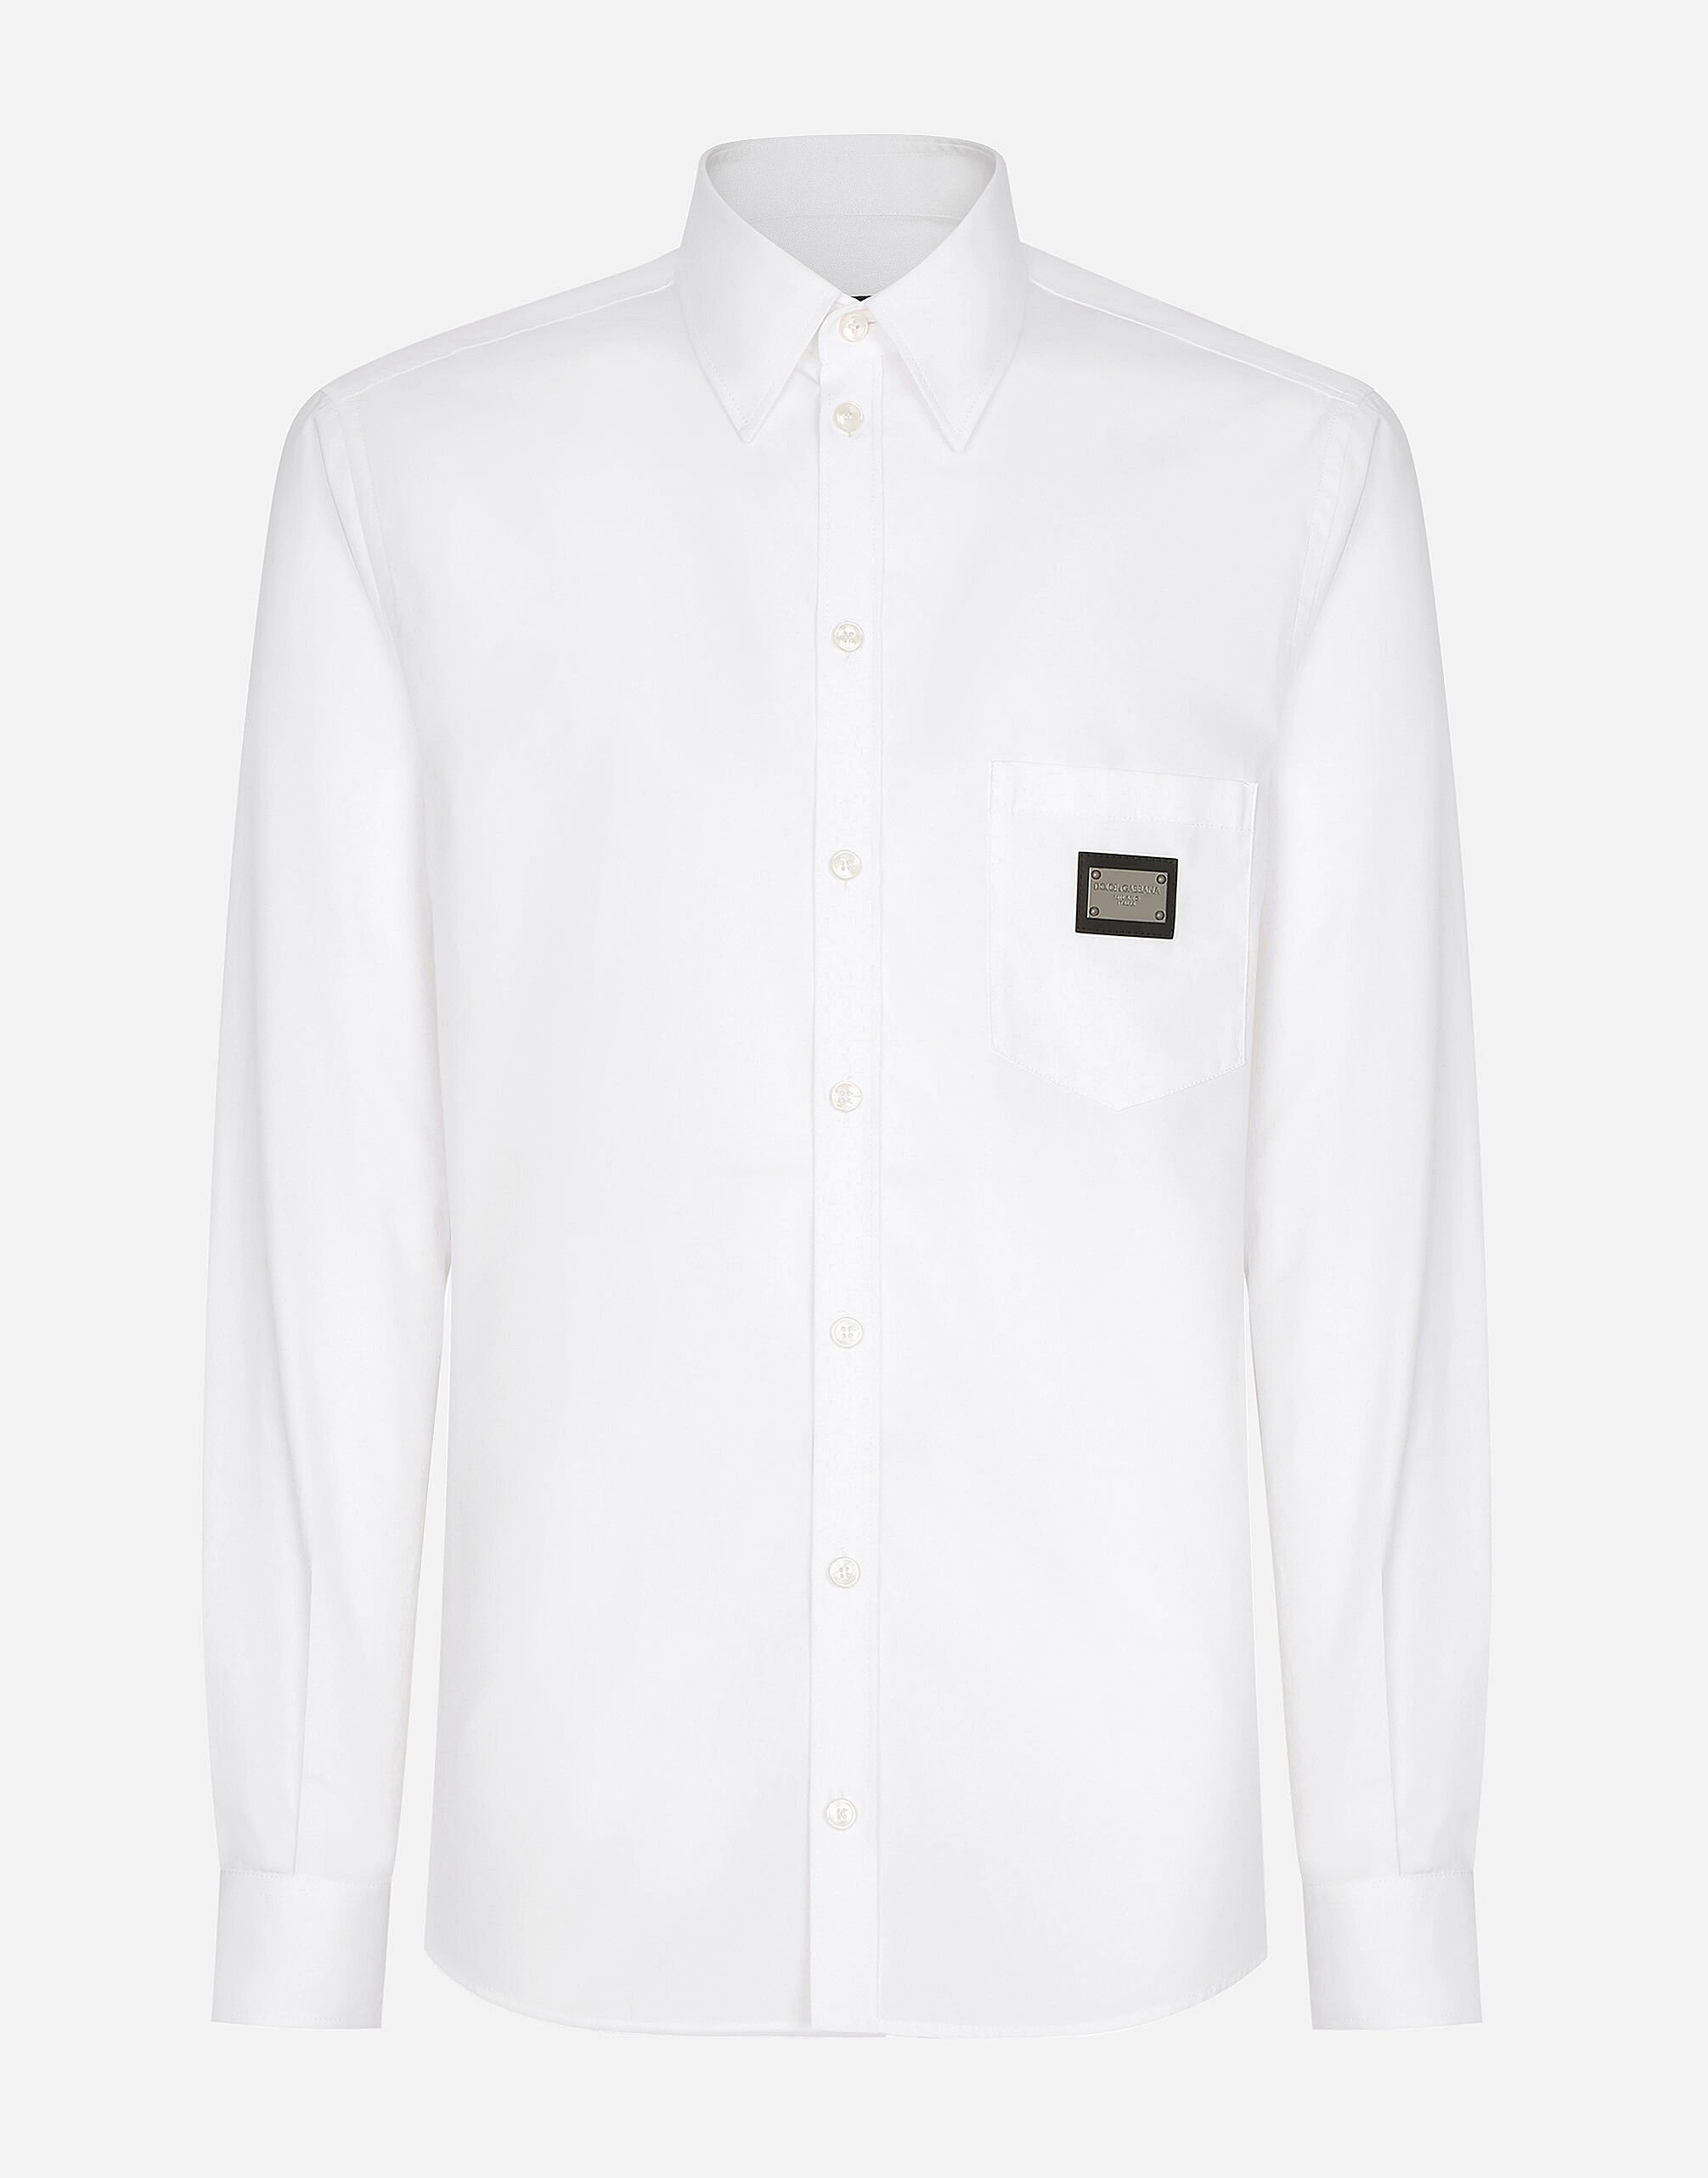 Dolce & Gabbana Cotton Martini-fit shirt with branded tag Black VG4390VP187